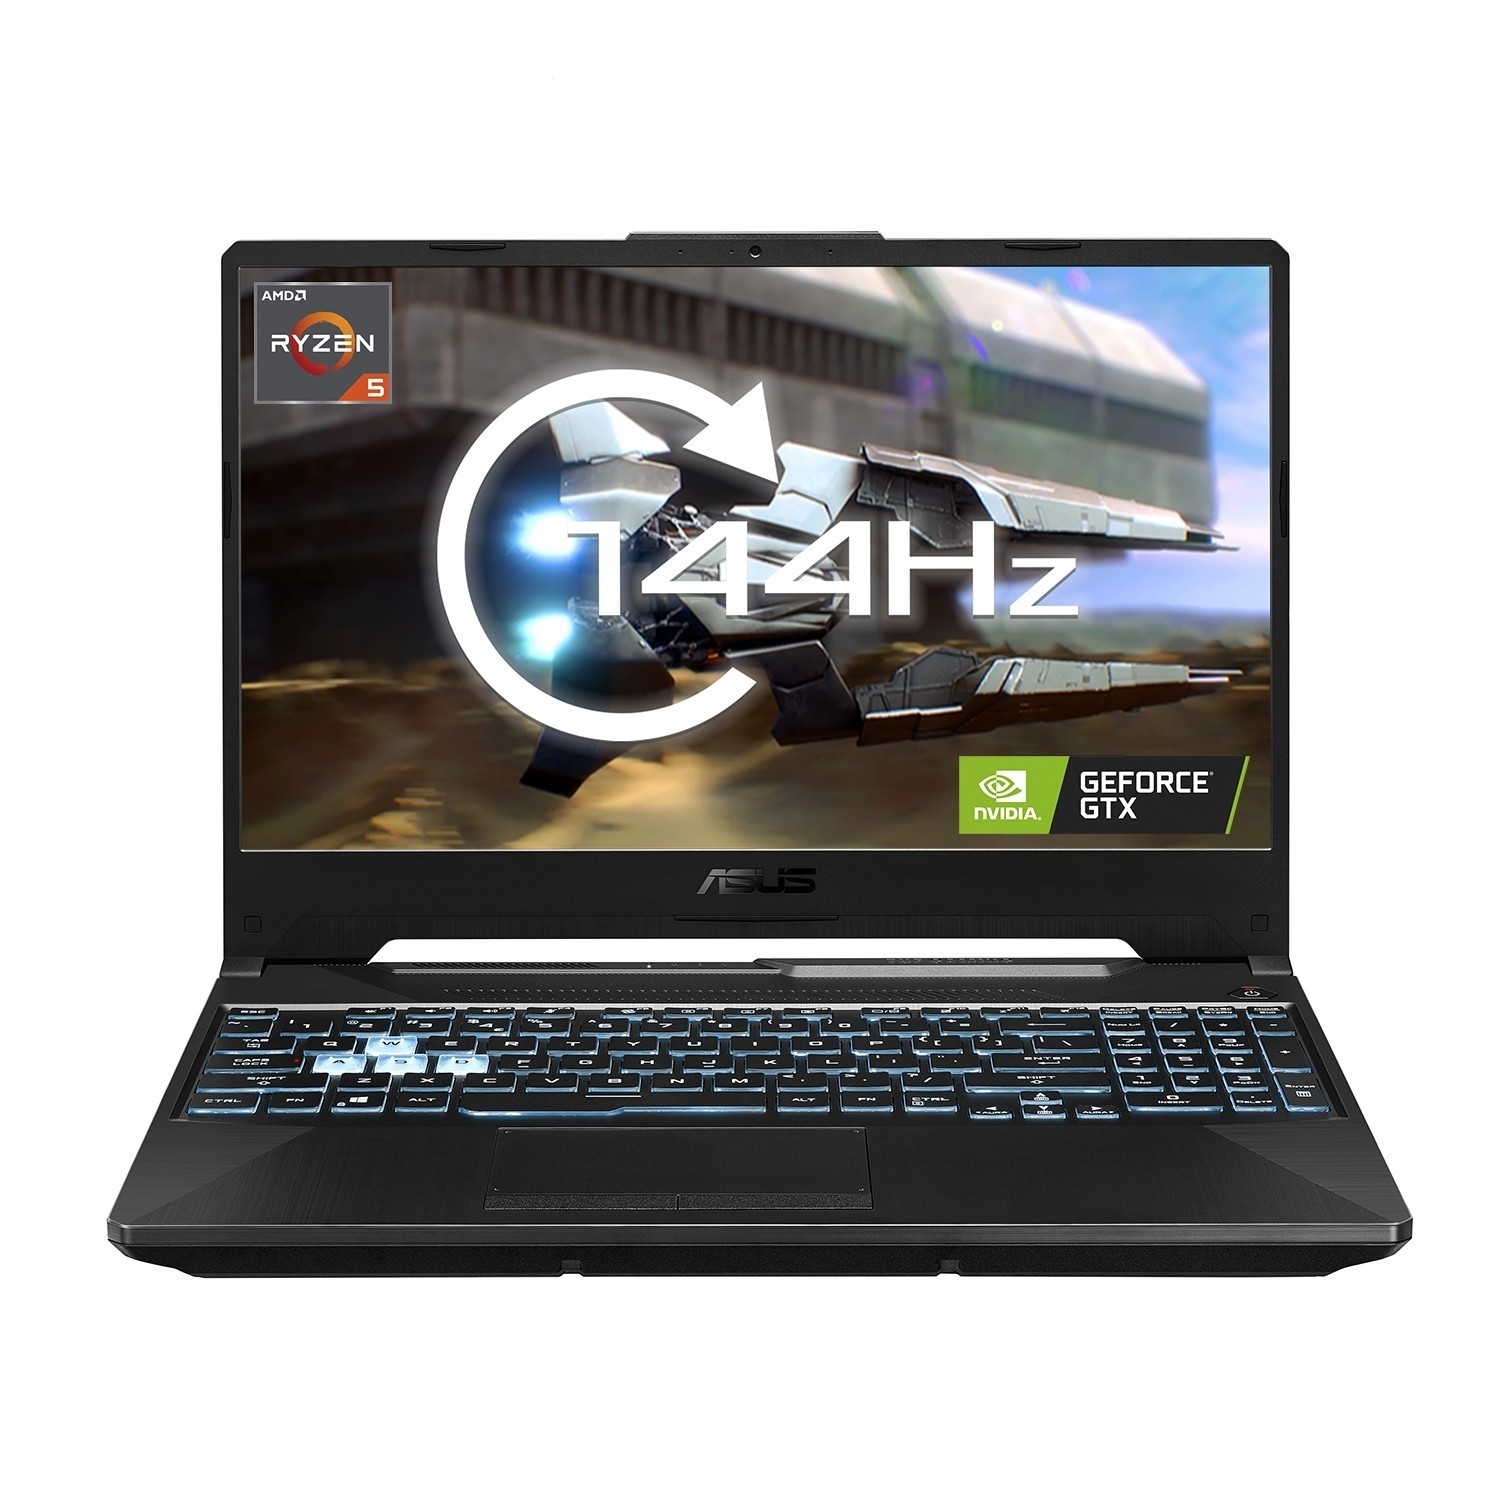 FA506NC-HN002W ASUS TUF Gaming A15 FA506NC-HN002W - AMD Ryzen 5 - 7535H / up to 4.55 GHz - Win 11 Home - GF RTX 3050 - 8 GB RAM - 512 GB SSD NVMe - 15.6